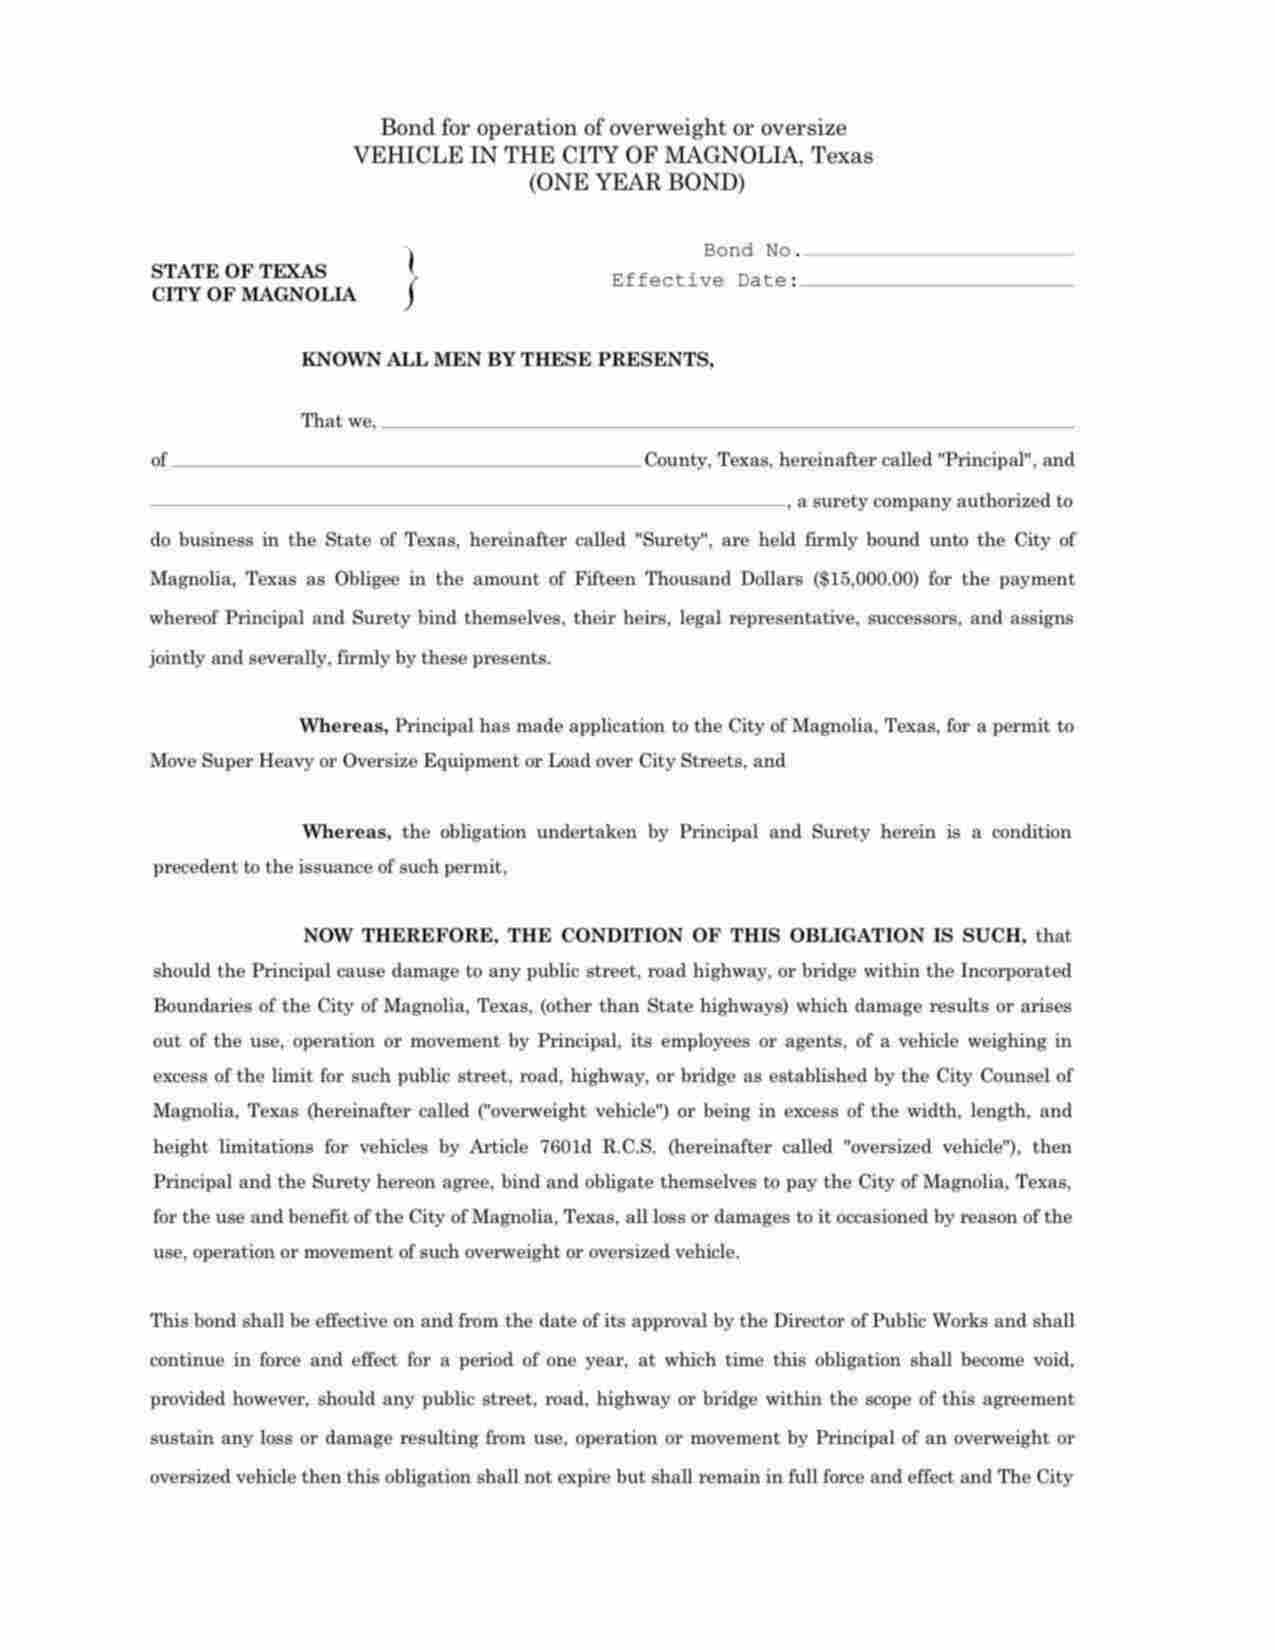 Texas Operation of Overweight or Oversize Vehicle Bond Form